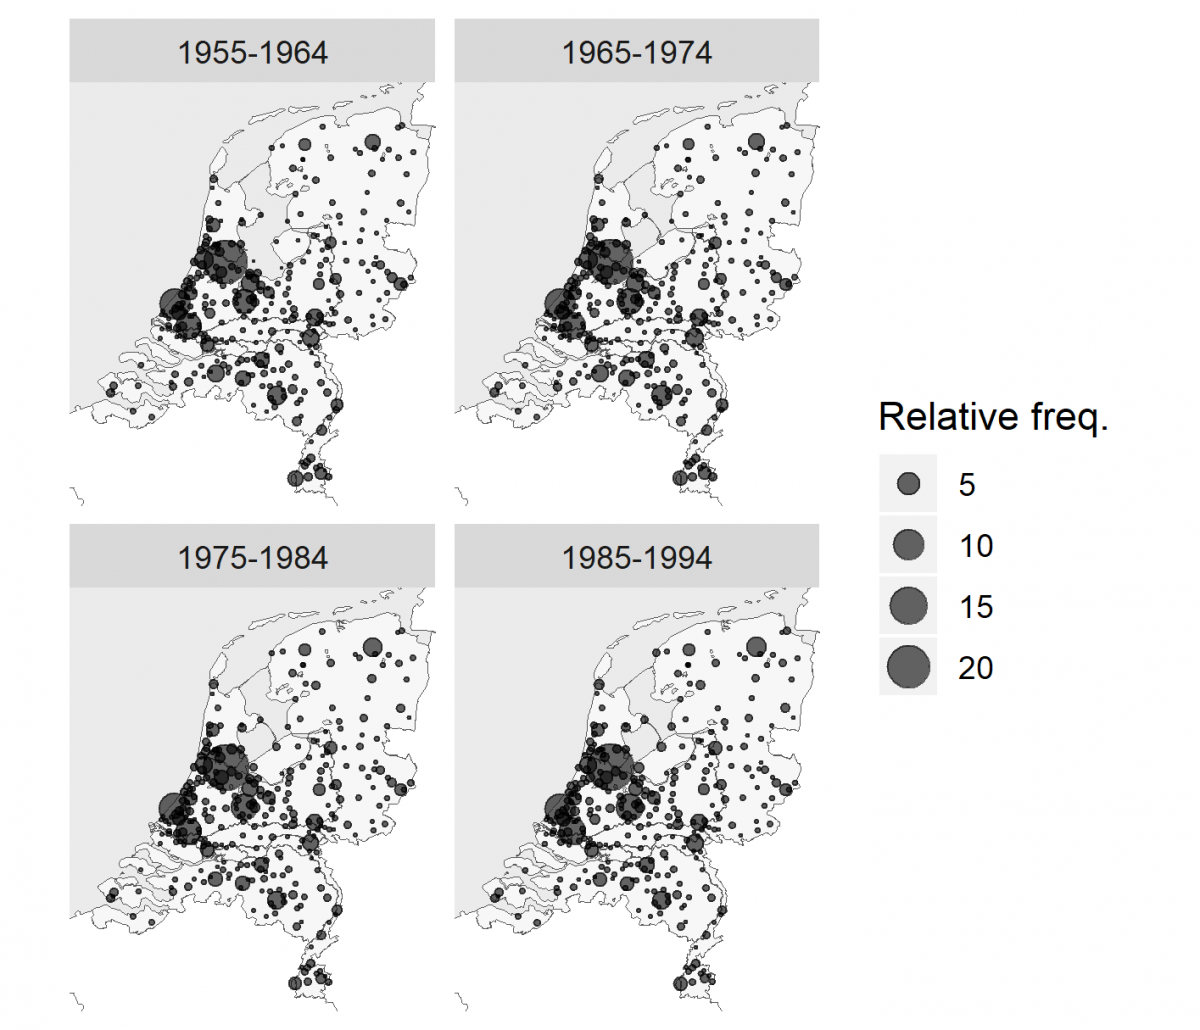 Figure 1 - Cities mentioned in De Volkskrant for the period 1960-1994